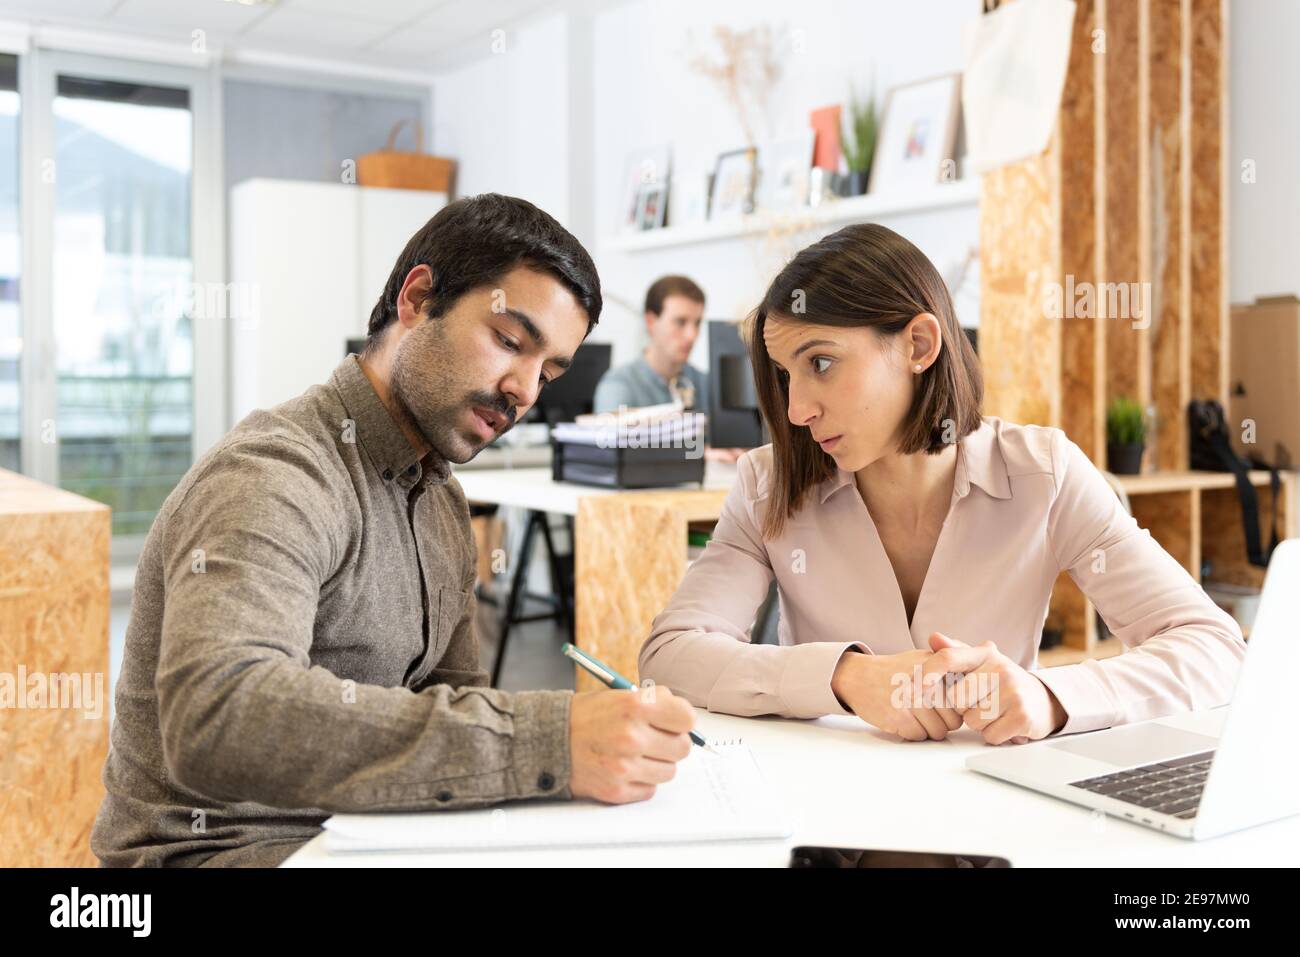 Coworkers chatting seriously in the office Stock Photo